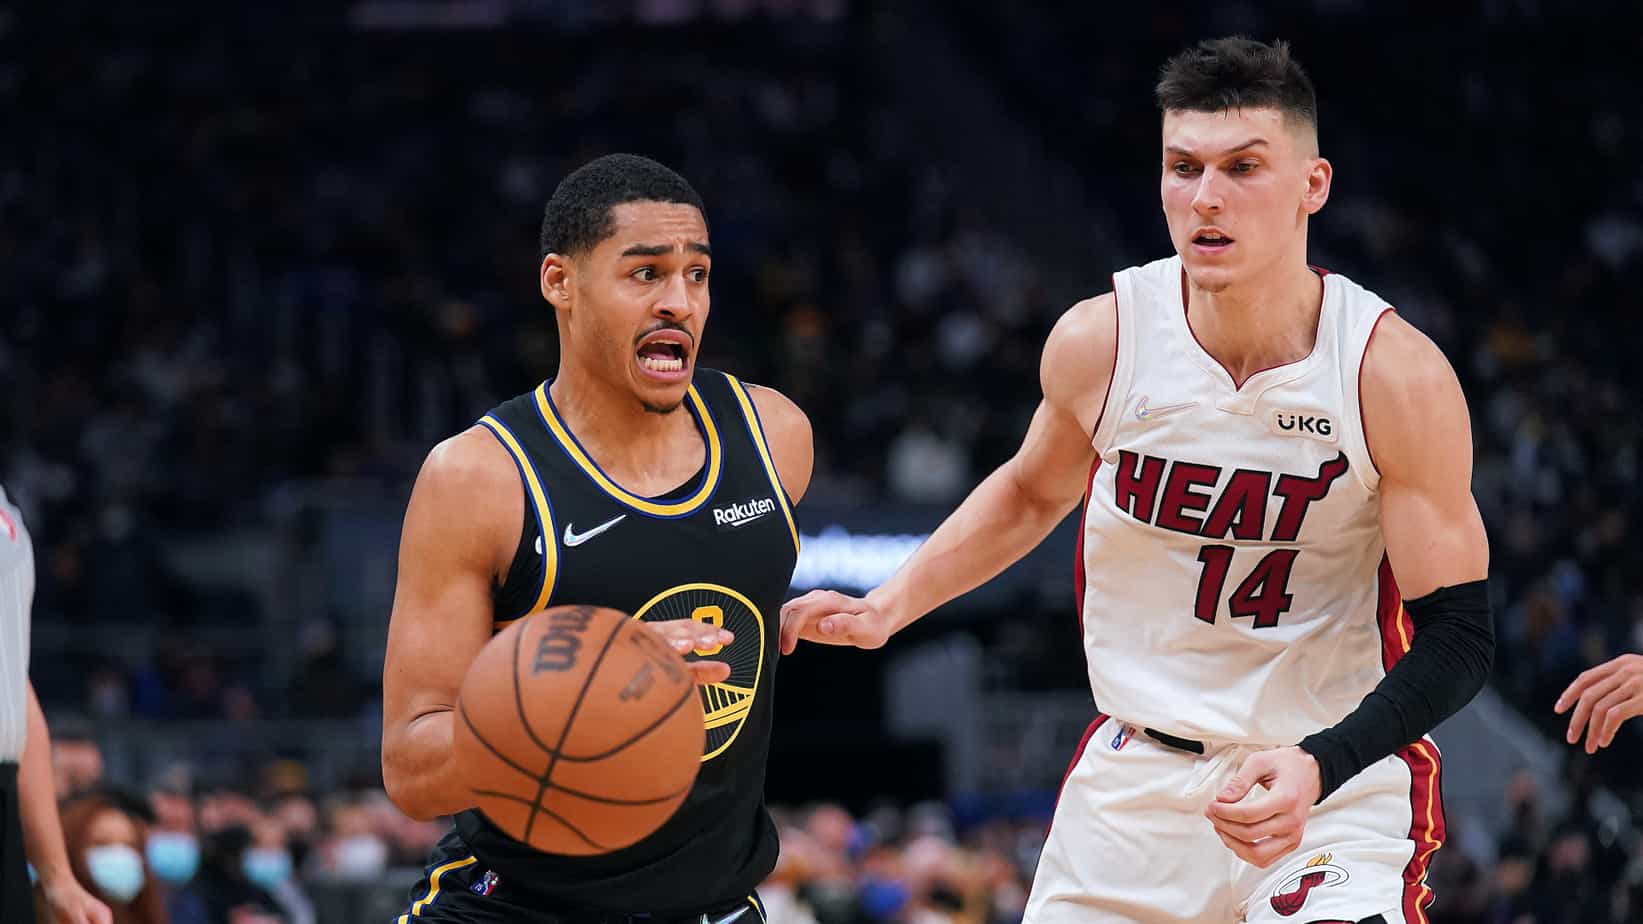 Miami Heat vs. Golden State Warriors – Betting Odds and Free Picks